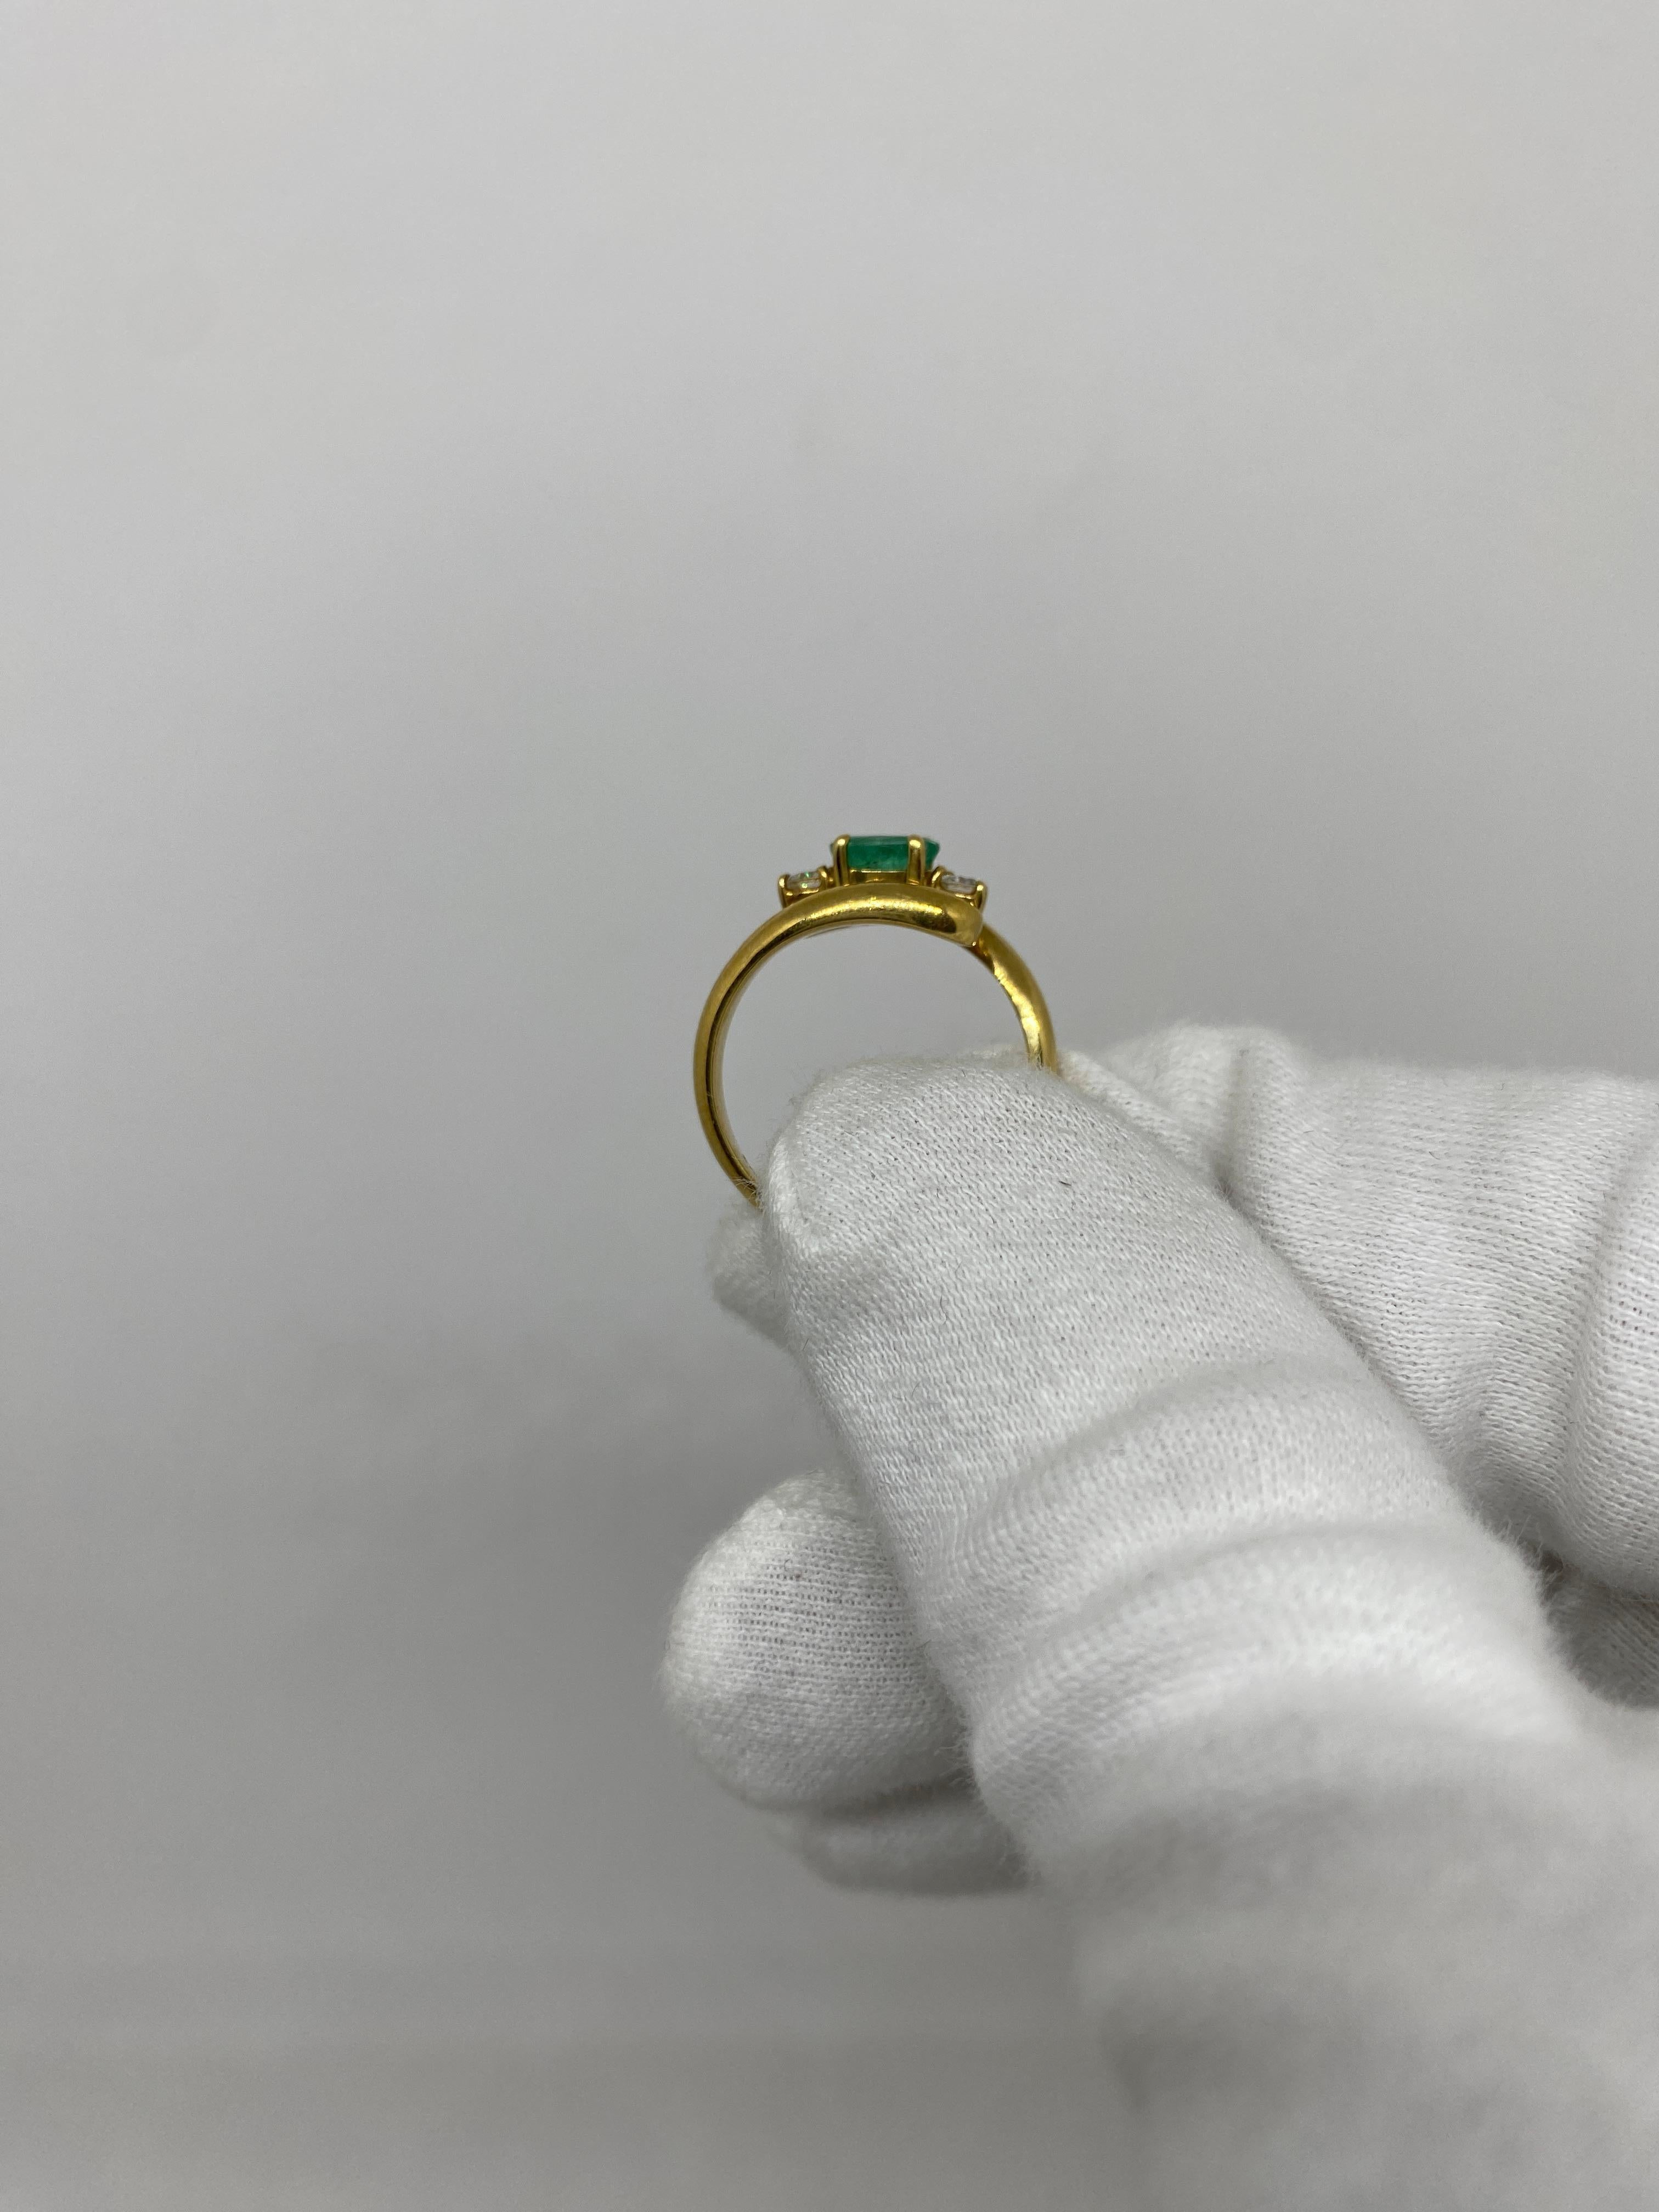 Brilliant Cut 18 Karat Yellow Gold Vintage Ring Emerald and White Diamond For Sale